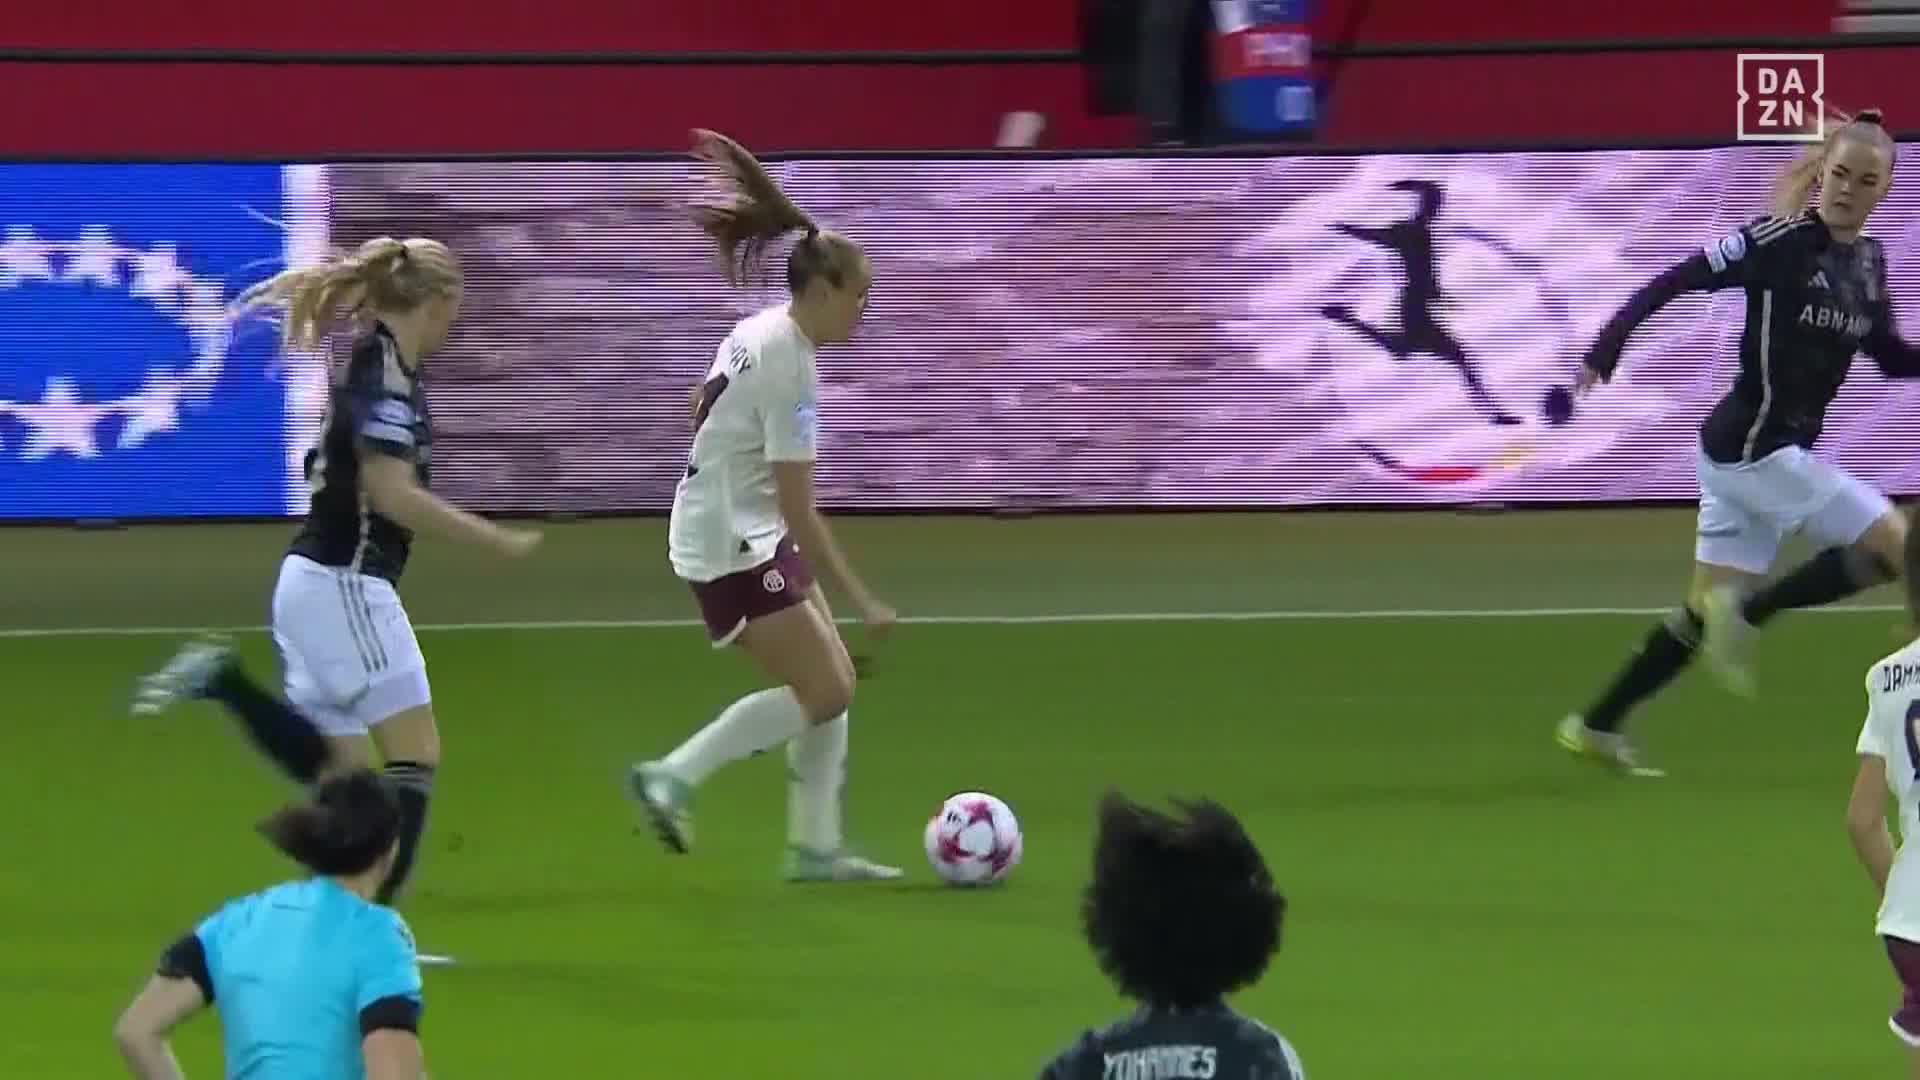 Blink and you'll miss it!Lea Schüller gives Bayern Munich the lead inside 90 seconds ⚡🏴󠁧󠁢󠁥󠁮󠁧󠁿 🎙️ 👉  🎙️ 👉  🎙️ 👉